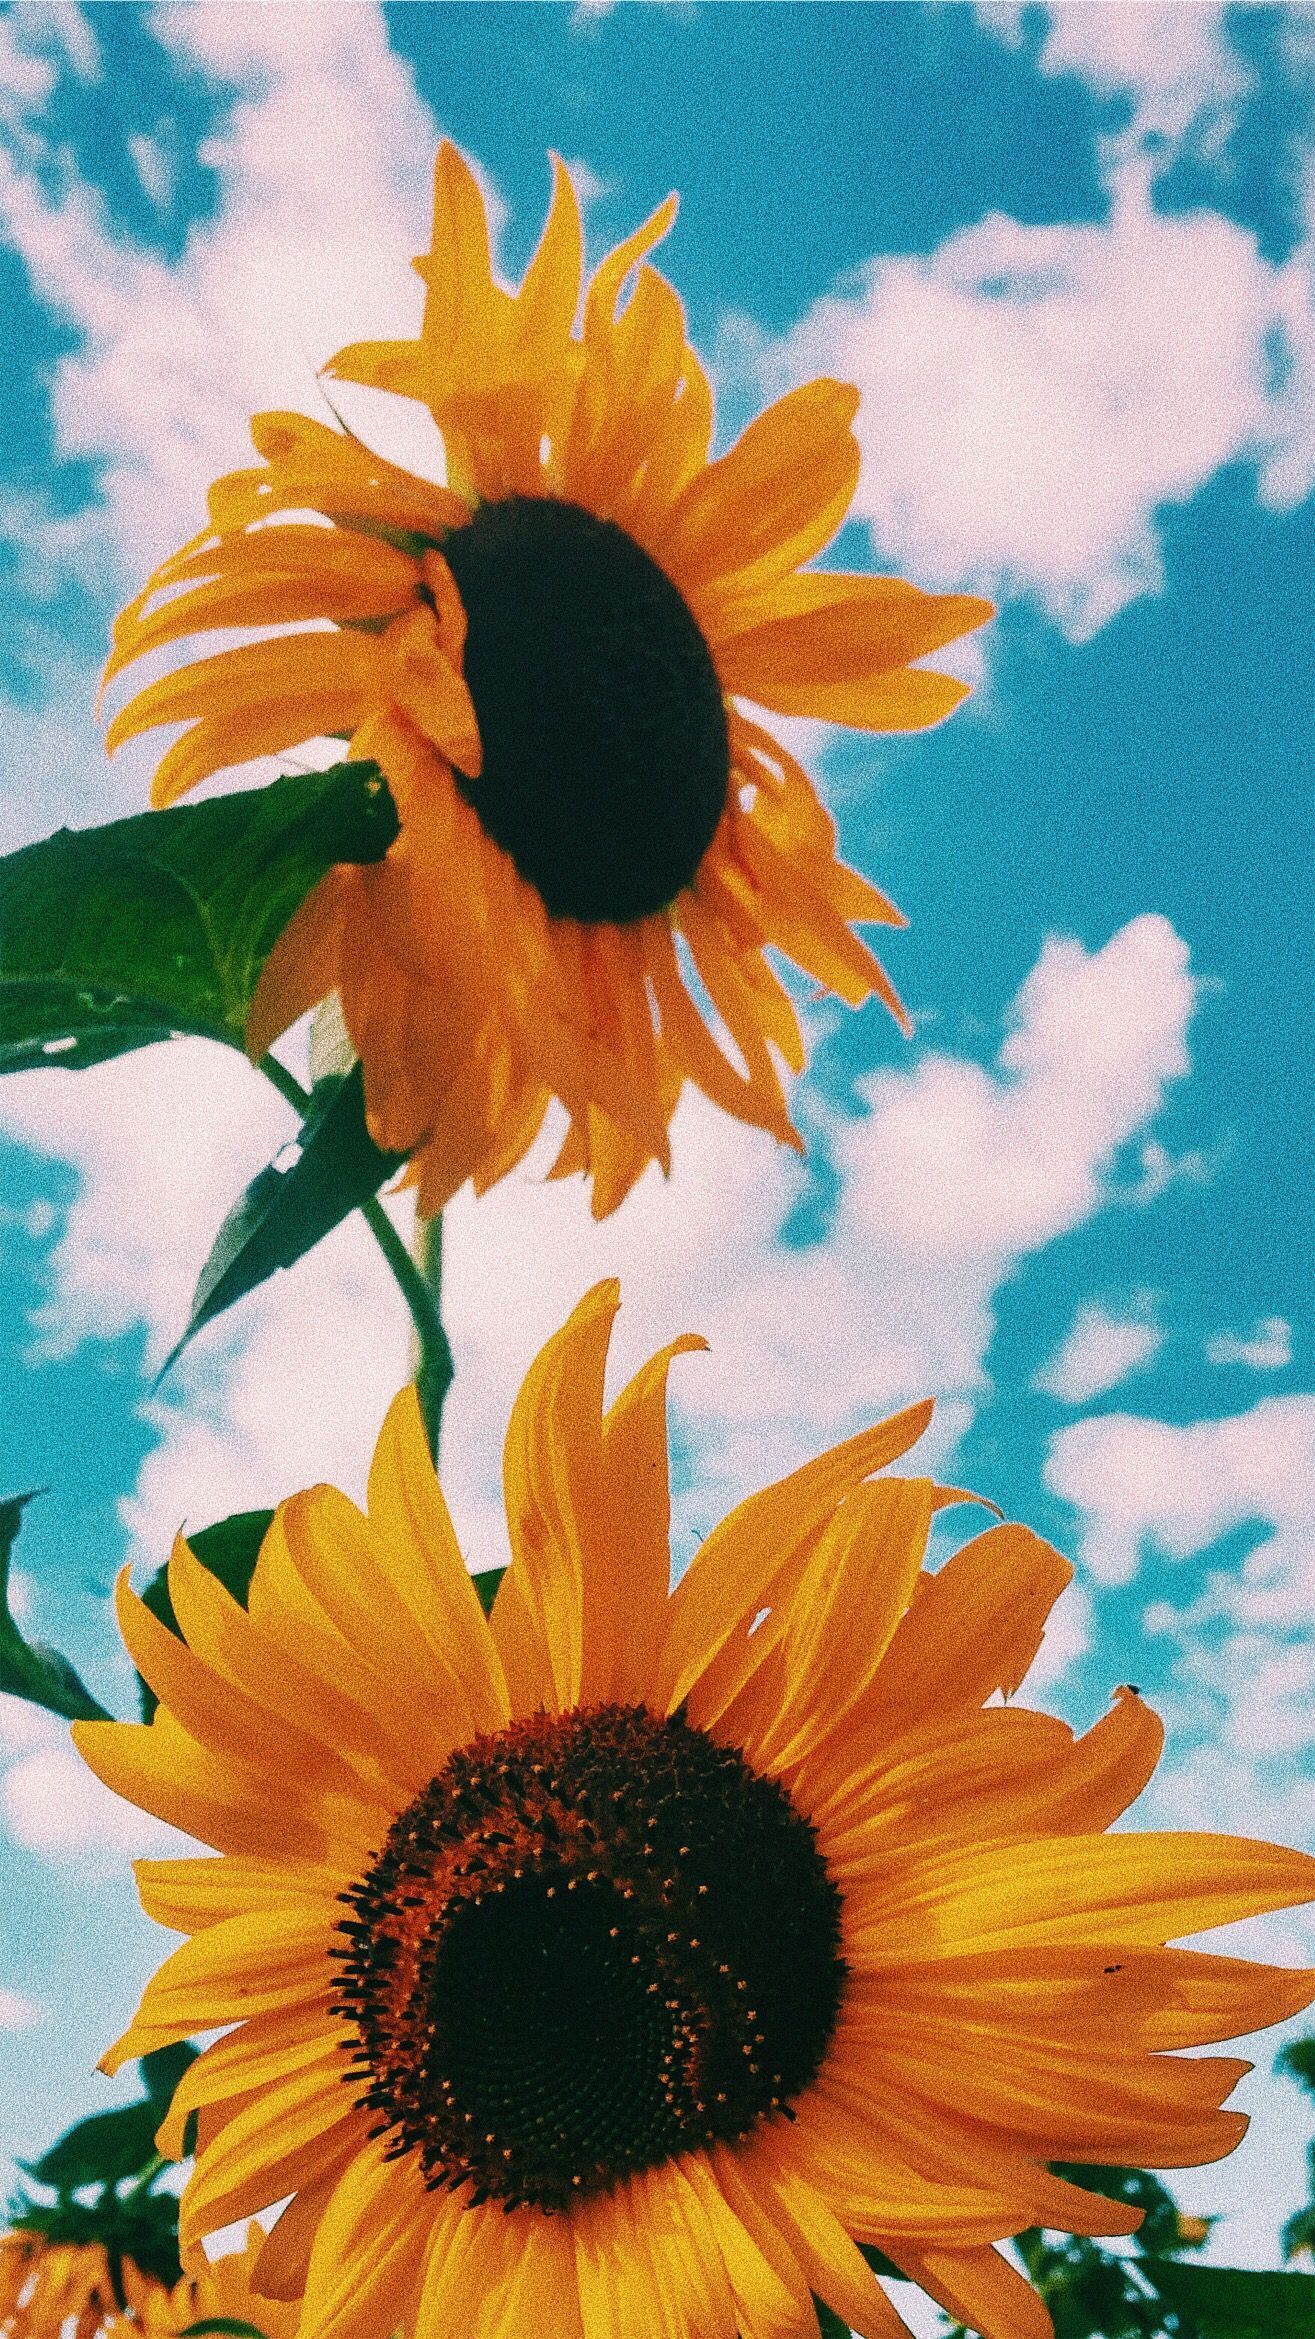 Sunflowers always remind me of hot days in Spain